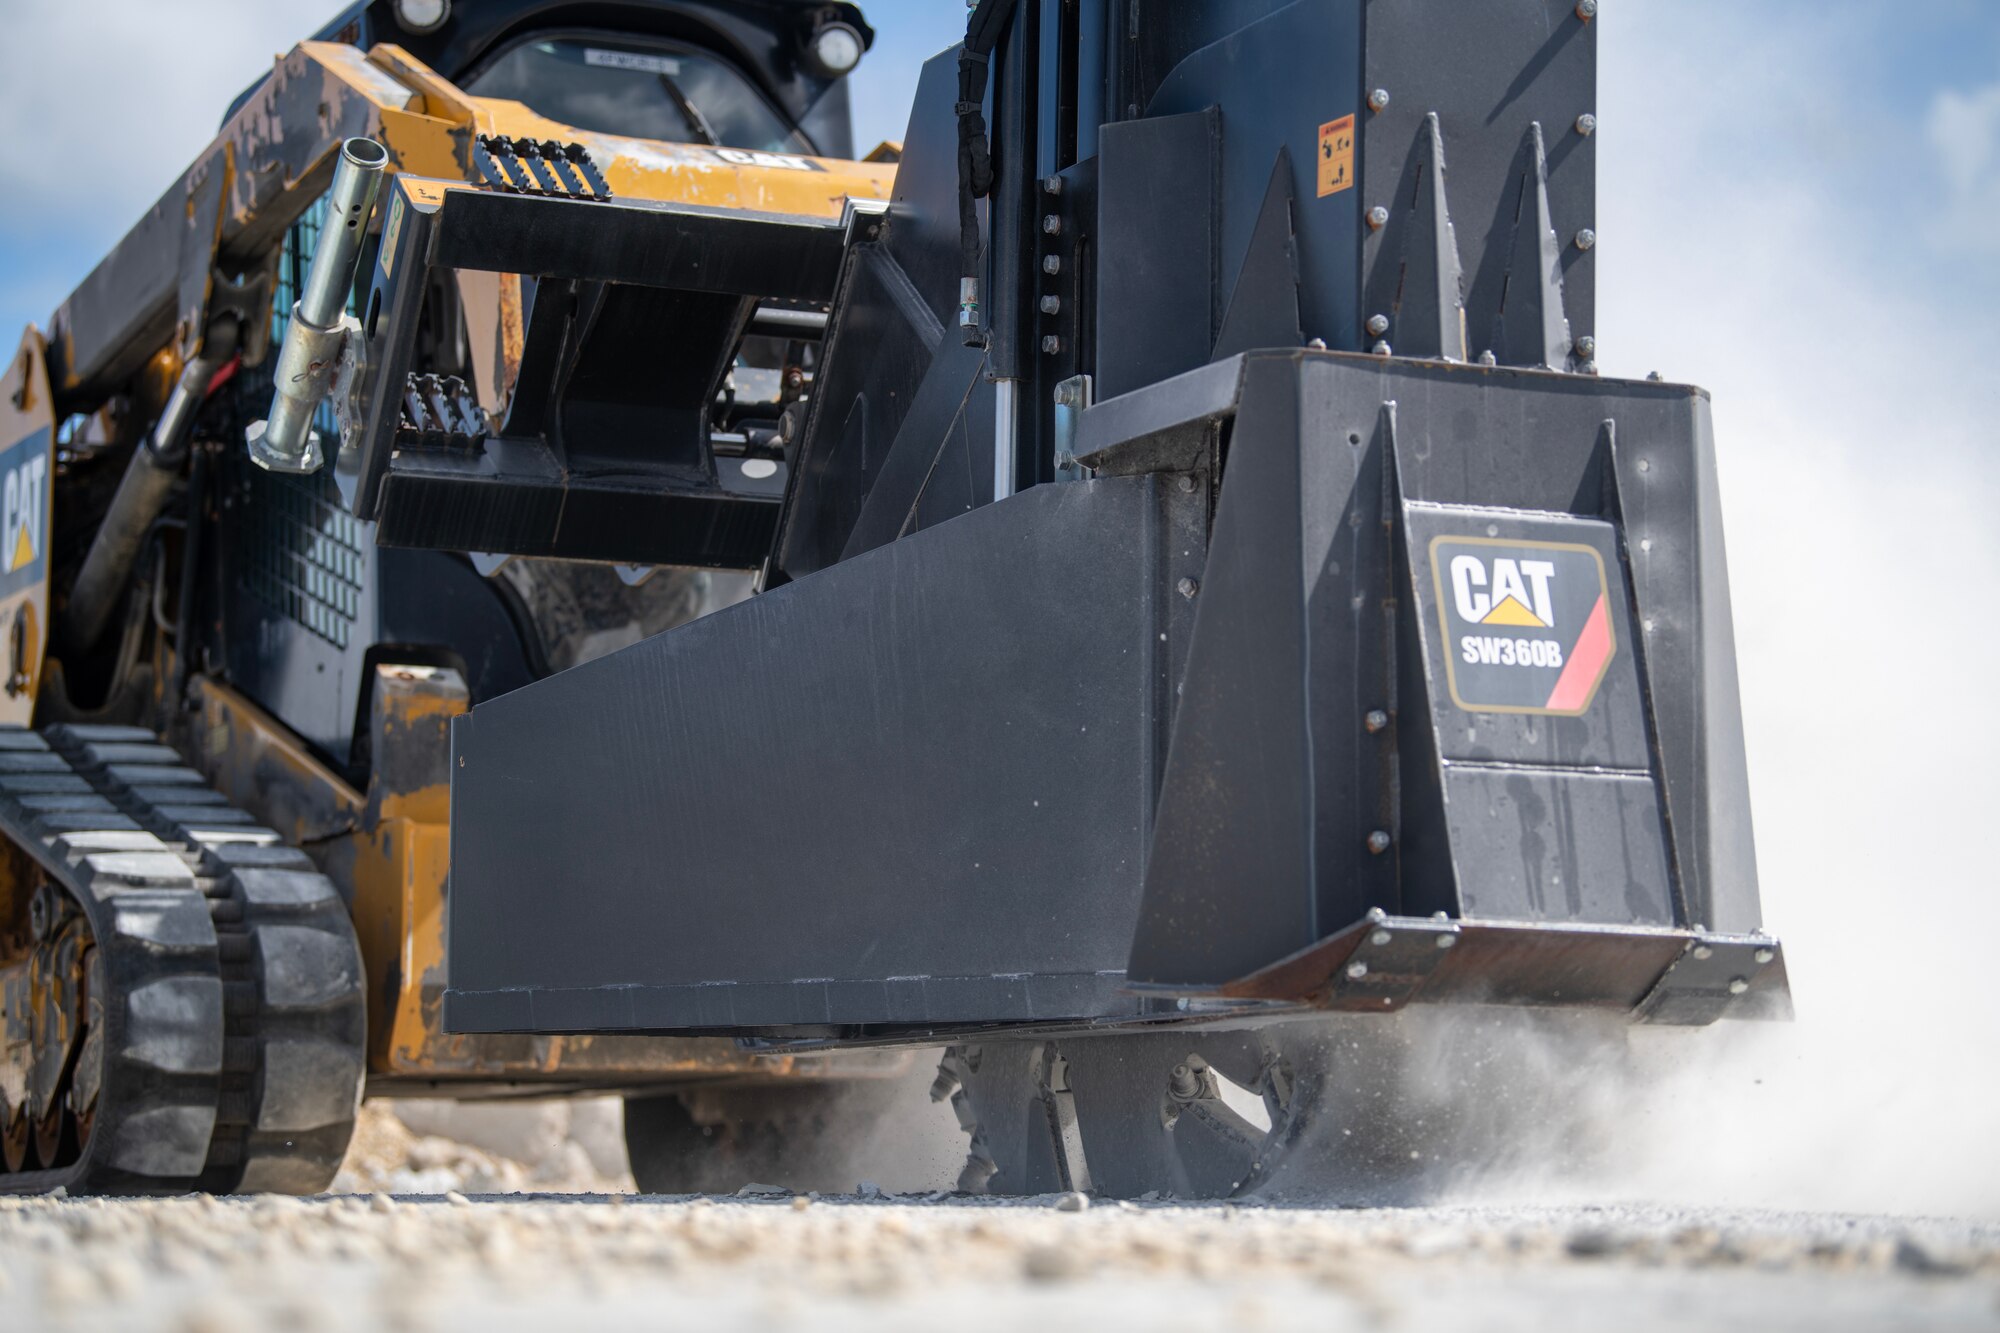 Skid-steer with concrete saw cutting up damaged airfield portion.